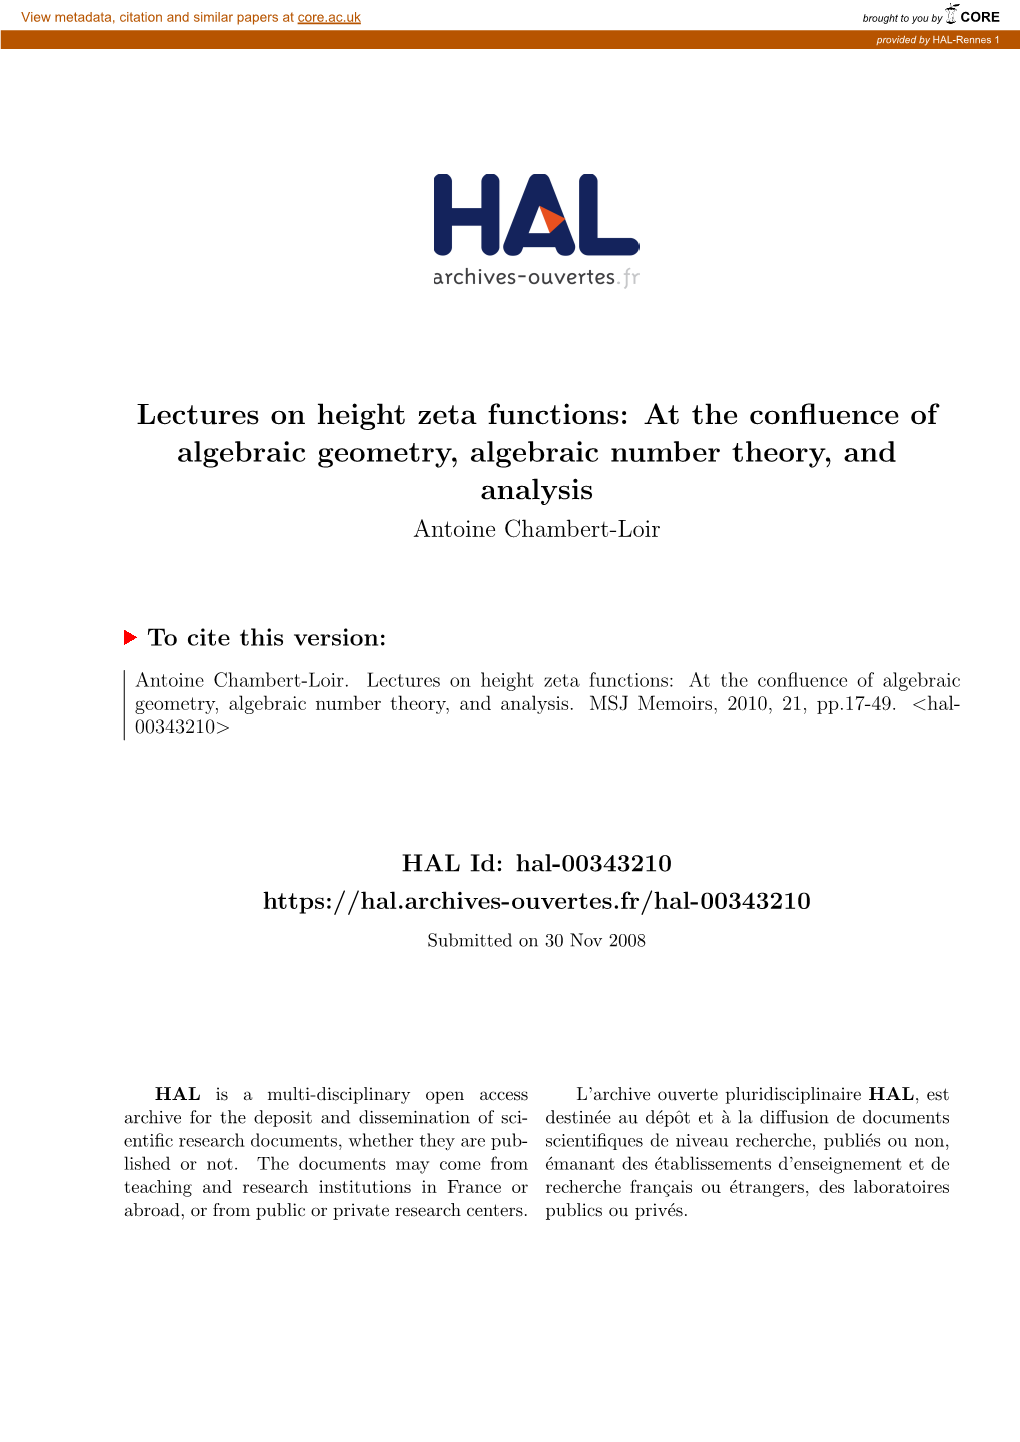 Lectures on Height Zeta Functions: at the Confluence of Algebraic